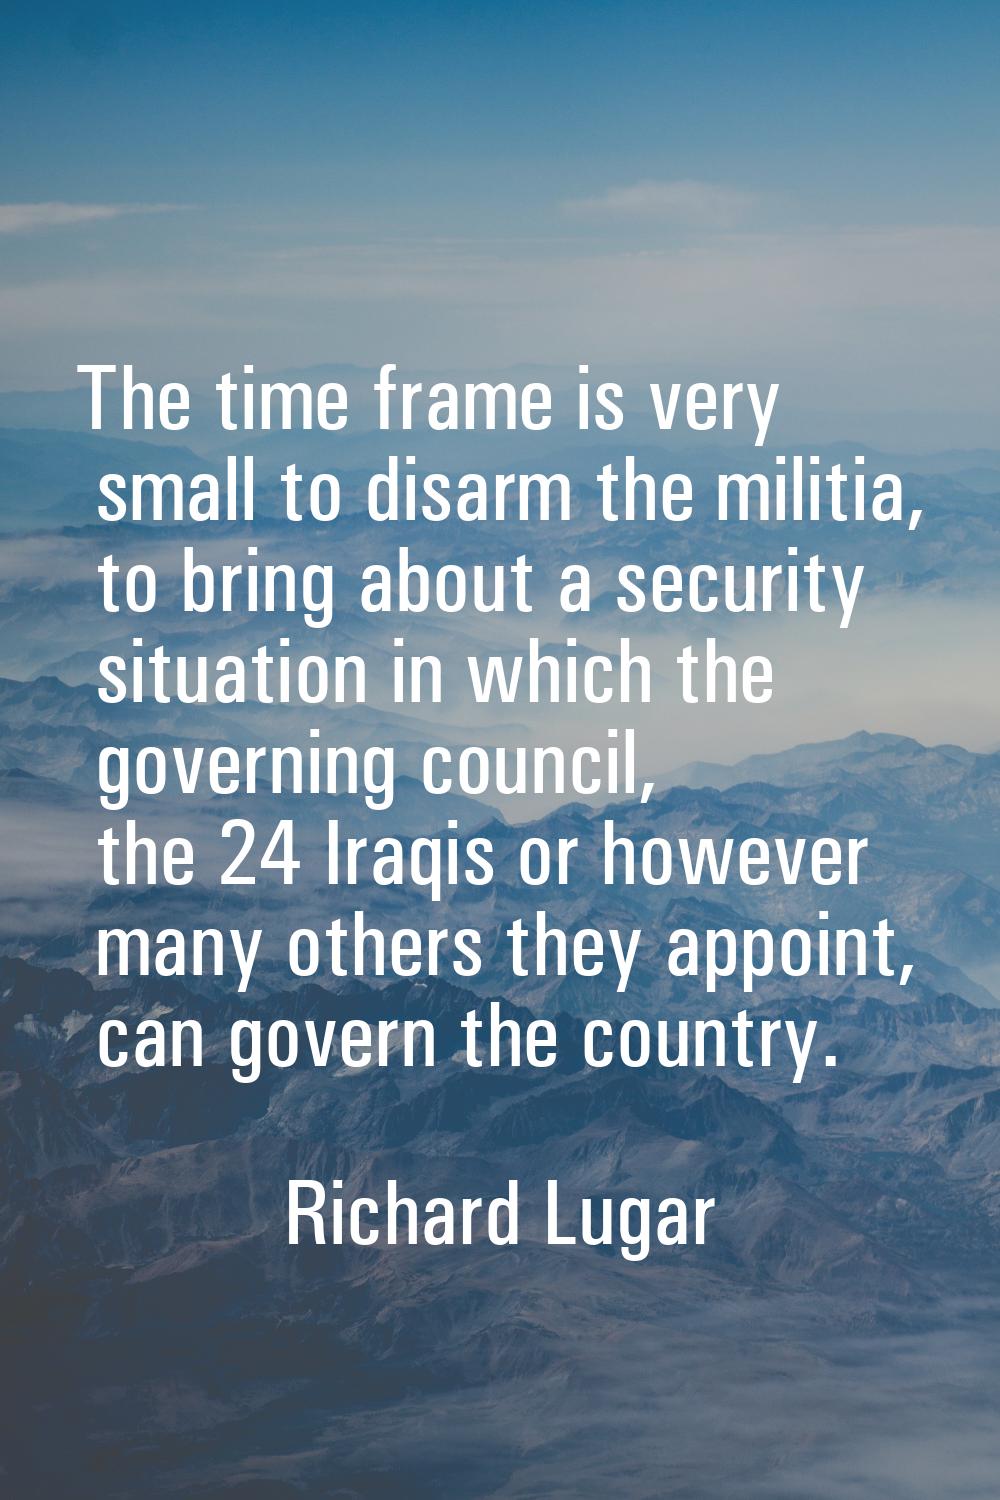 The time frame is very small to disarm the militia, to bring about a security situation in which th